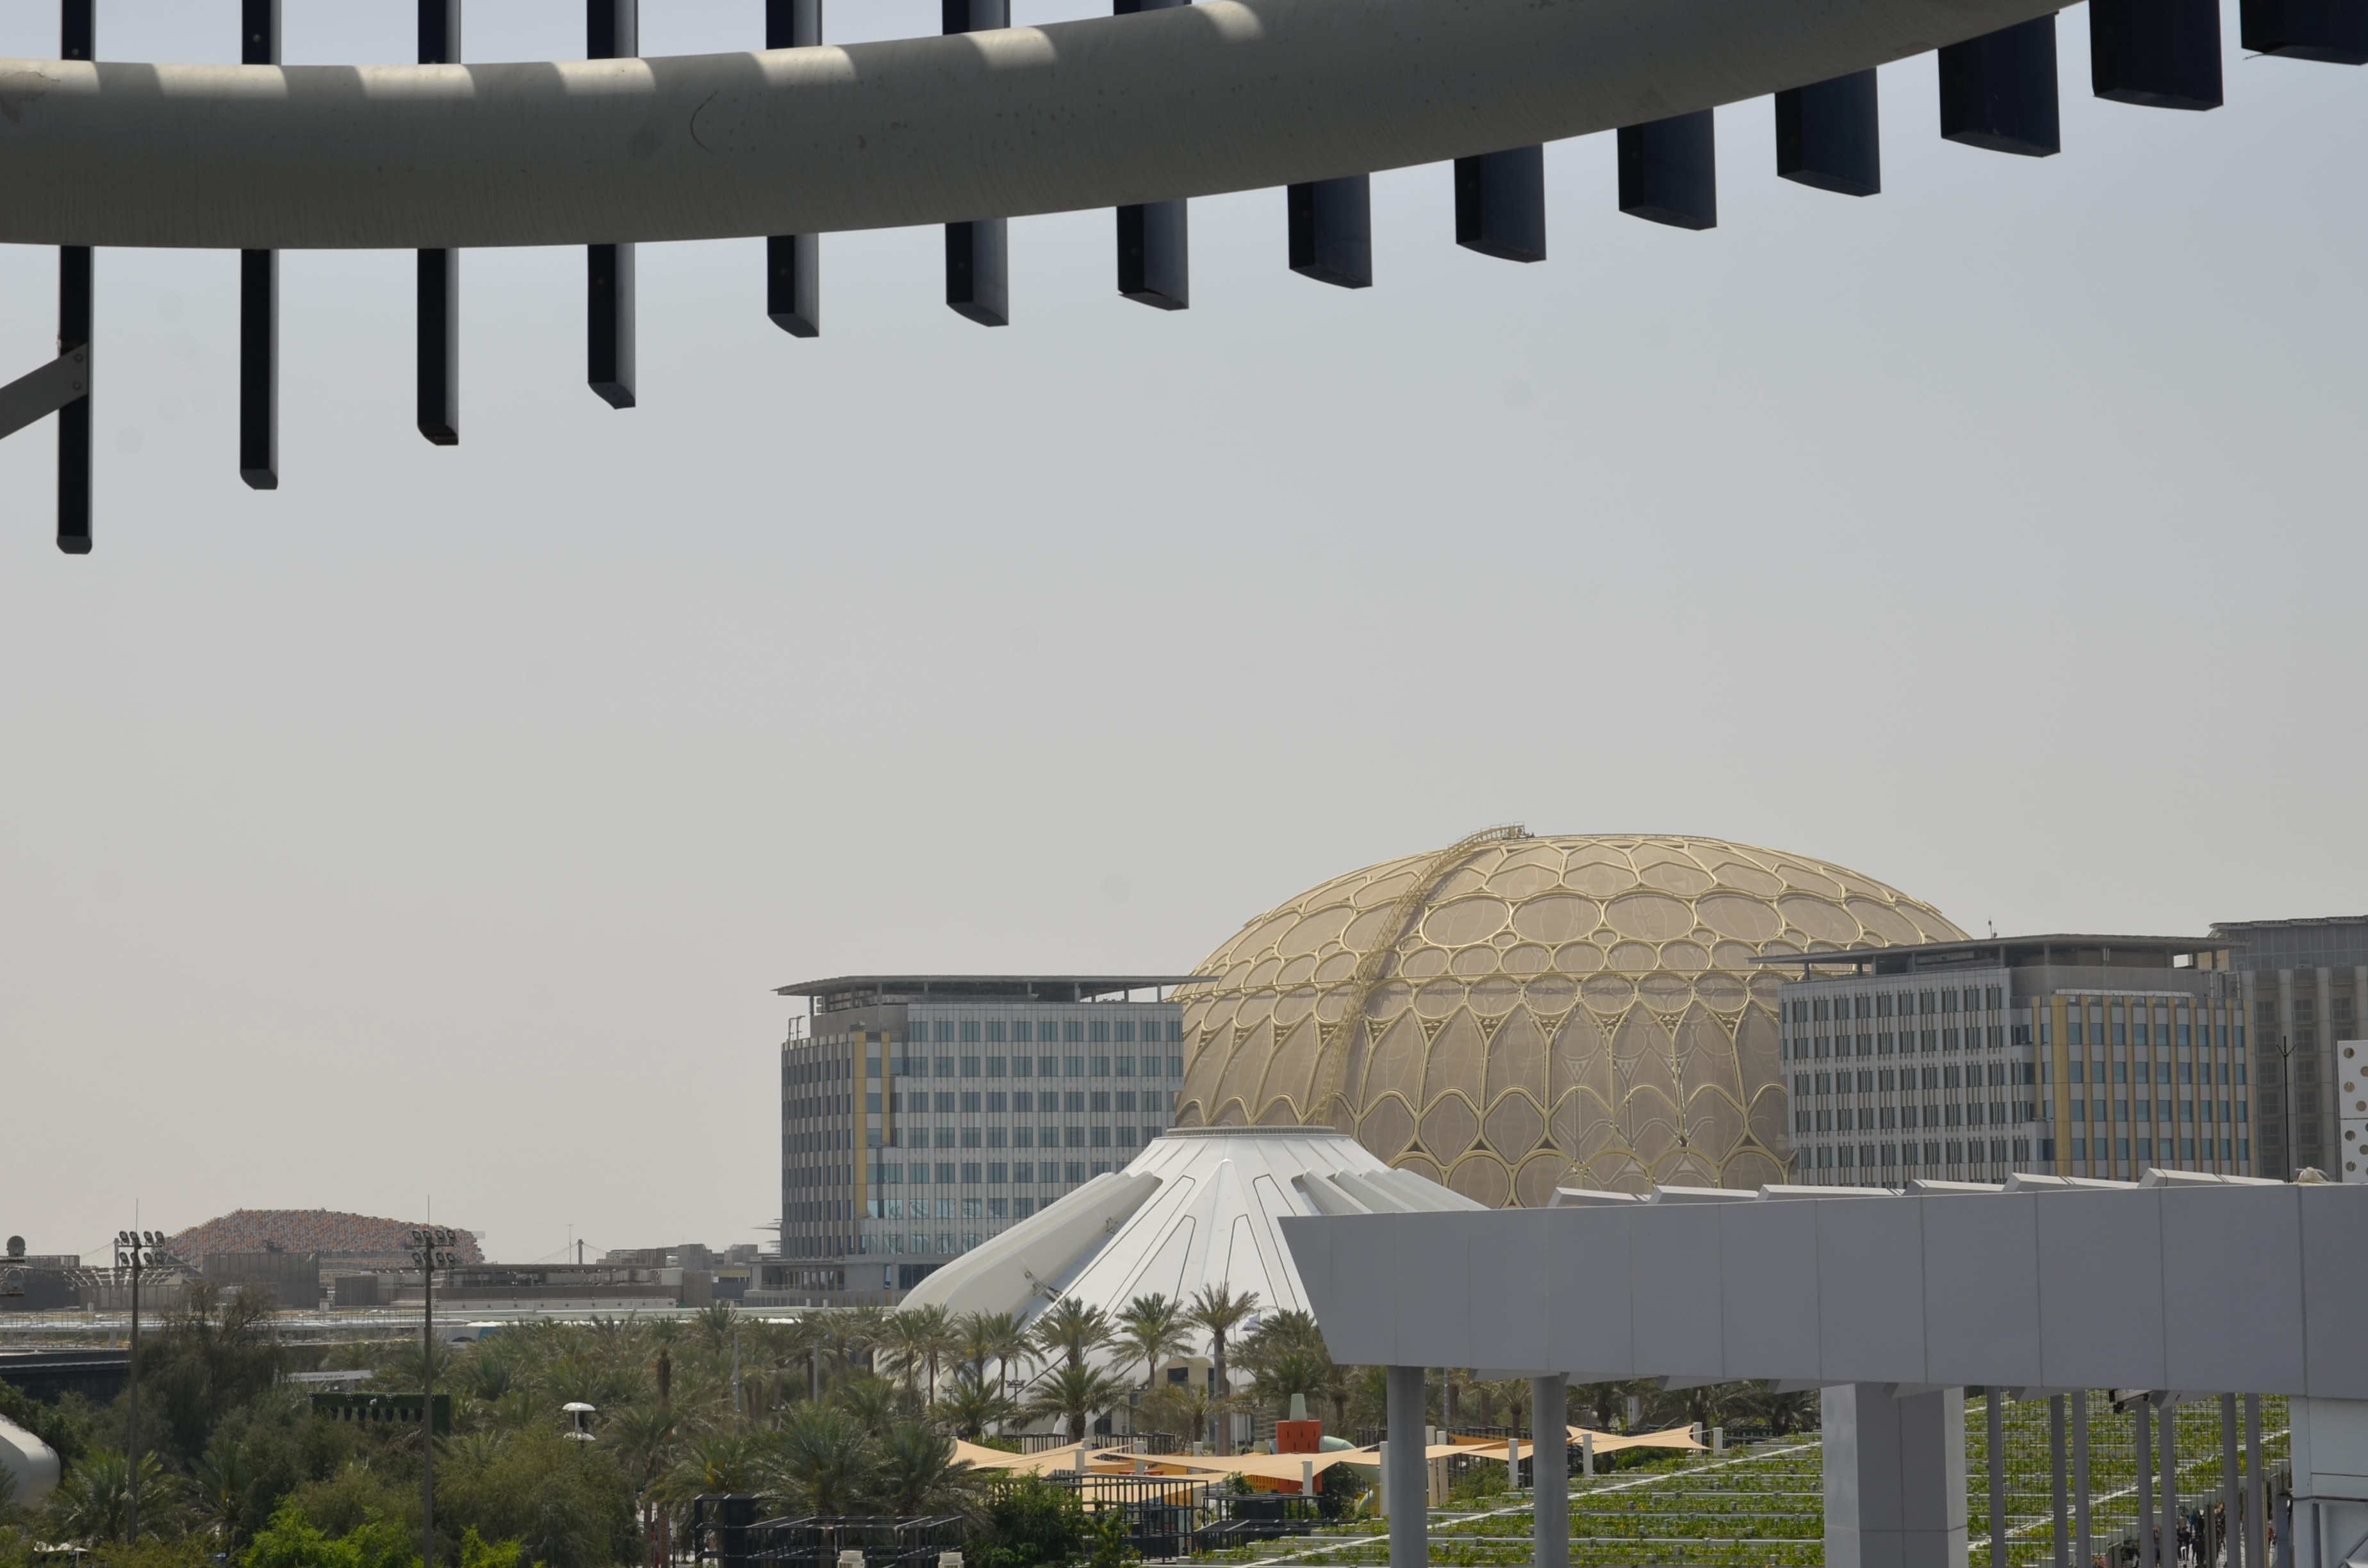 A view of the Al Wasl Dome, Expo 2020 site